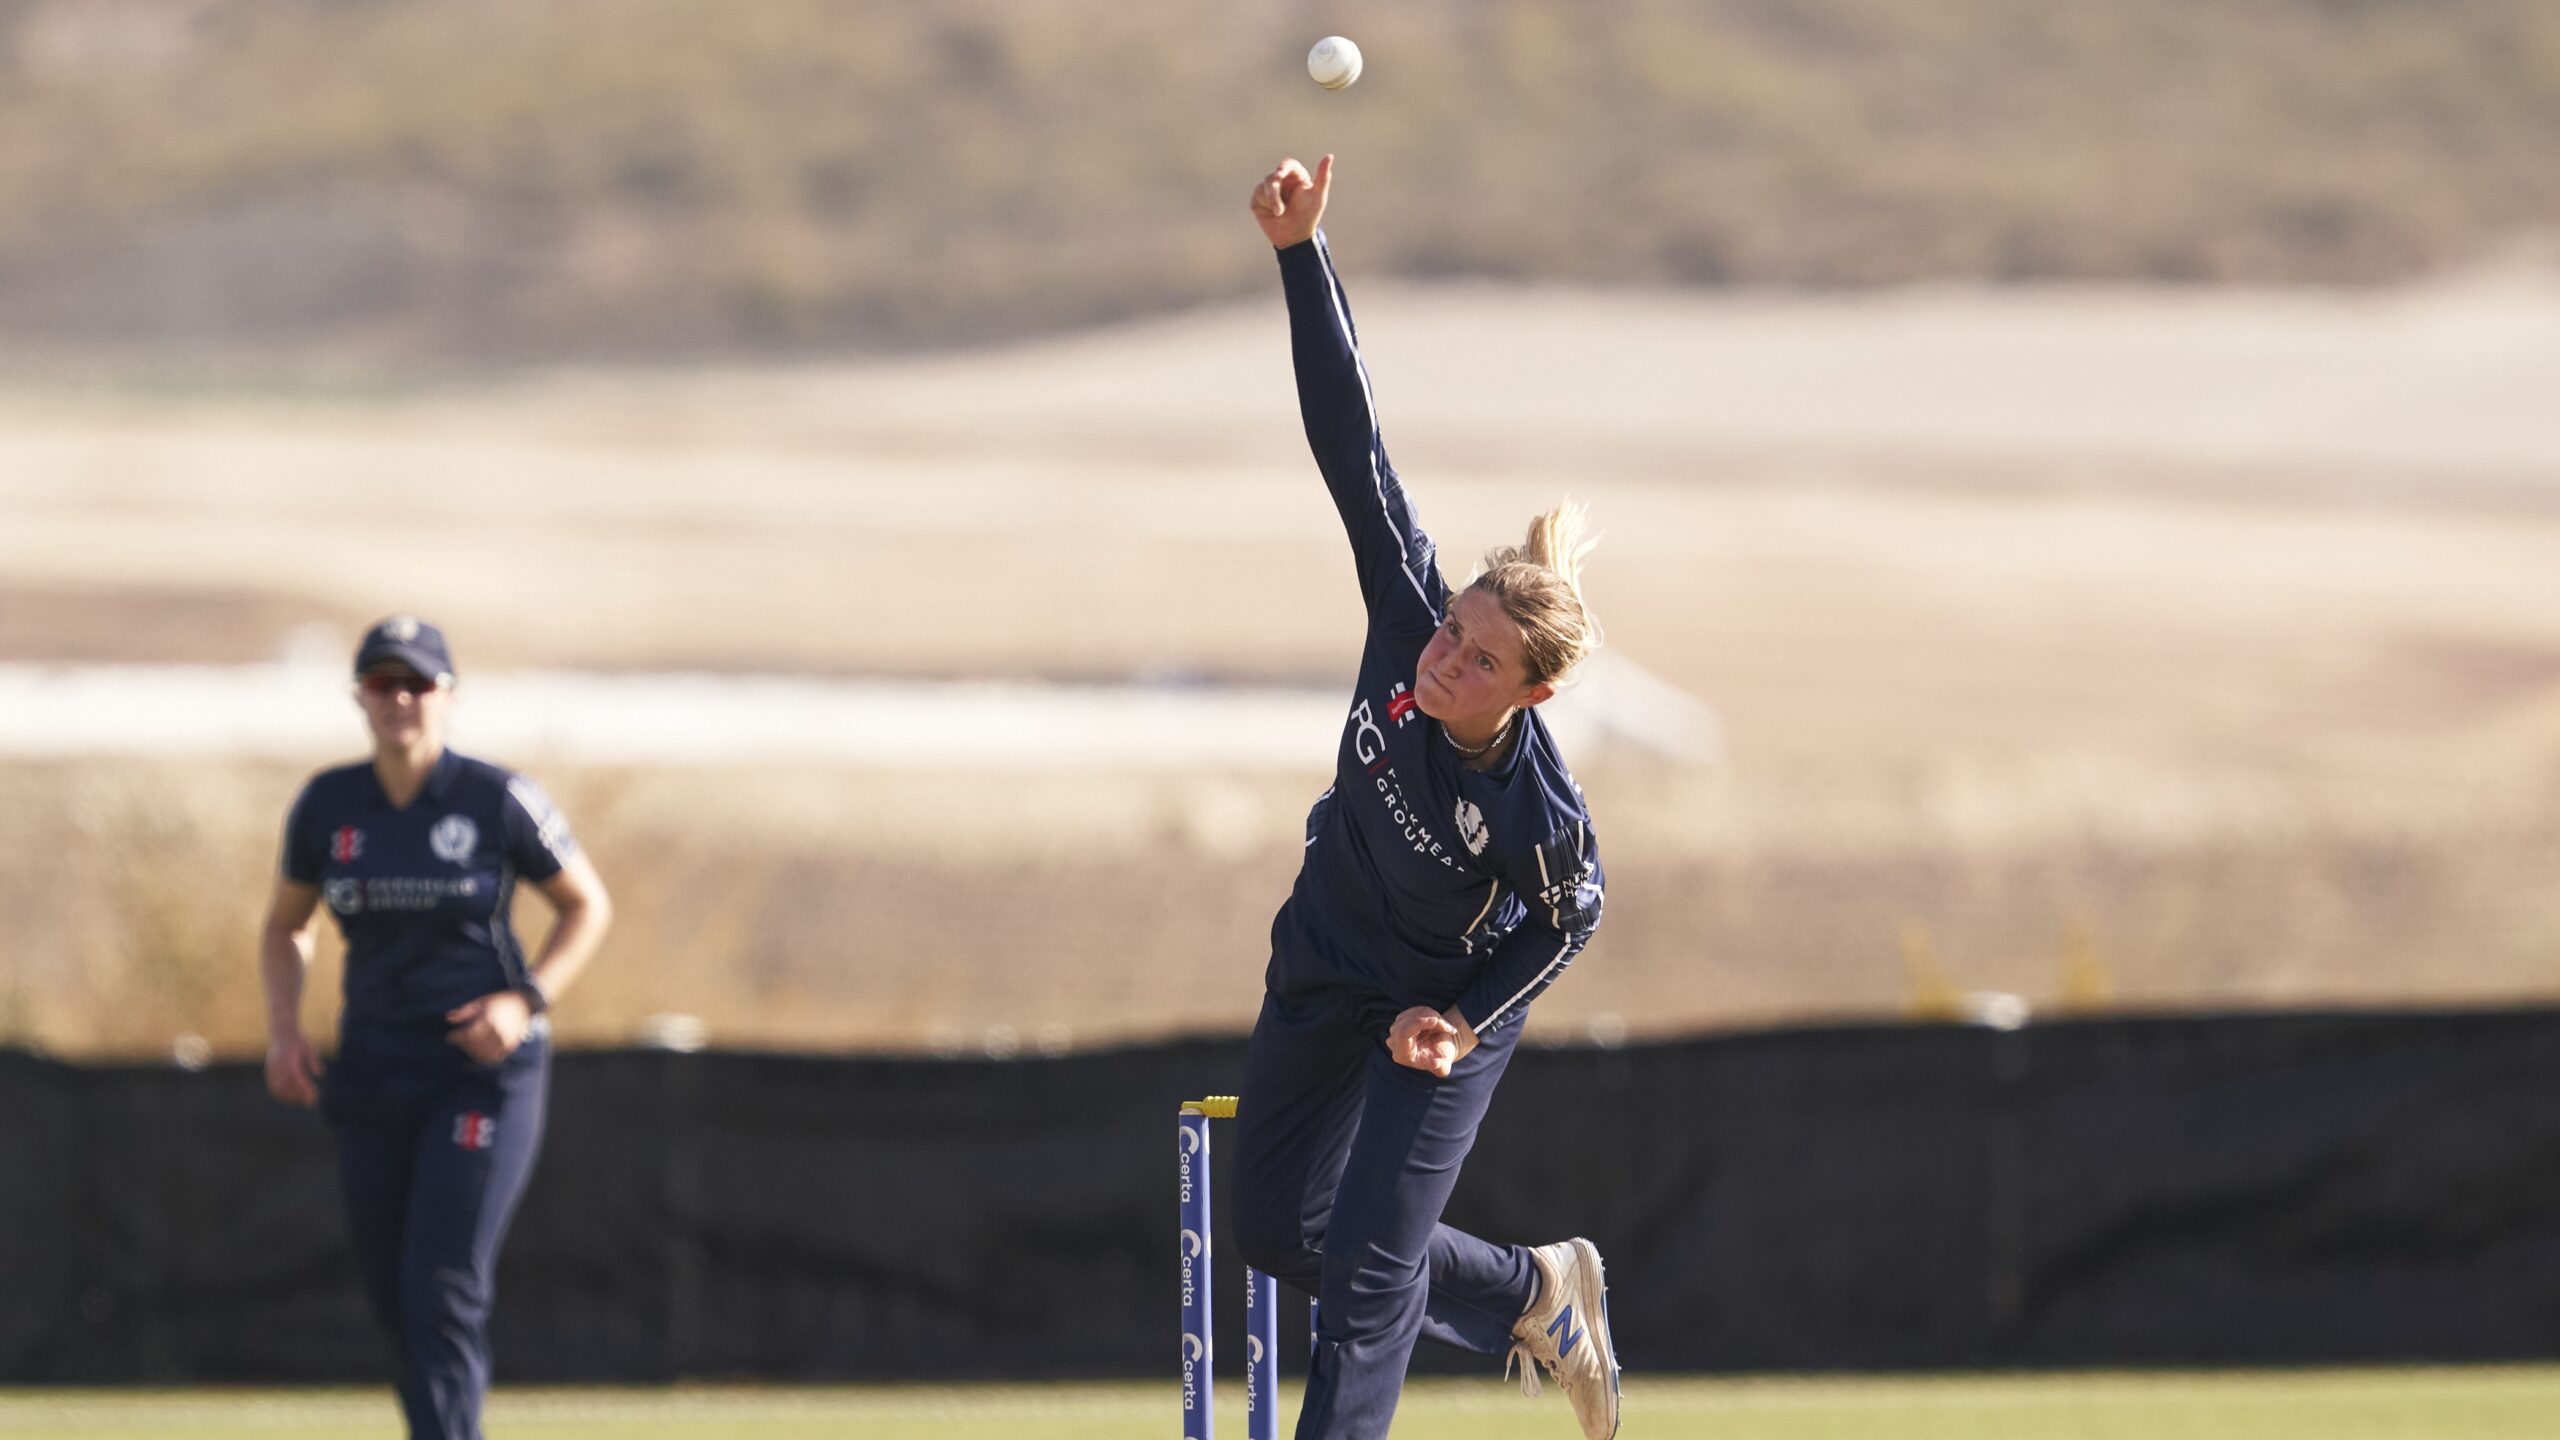 DARCEY CARTER NOMINATED FOR ICC WOMEN’S EMERGING CRICKETER OF THE YEAR 2023